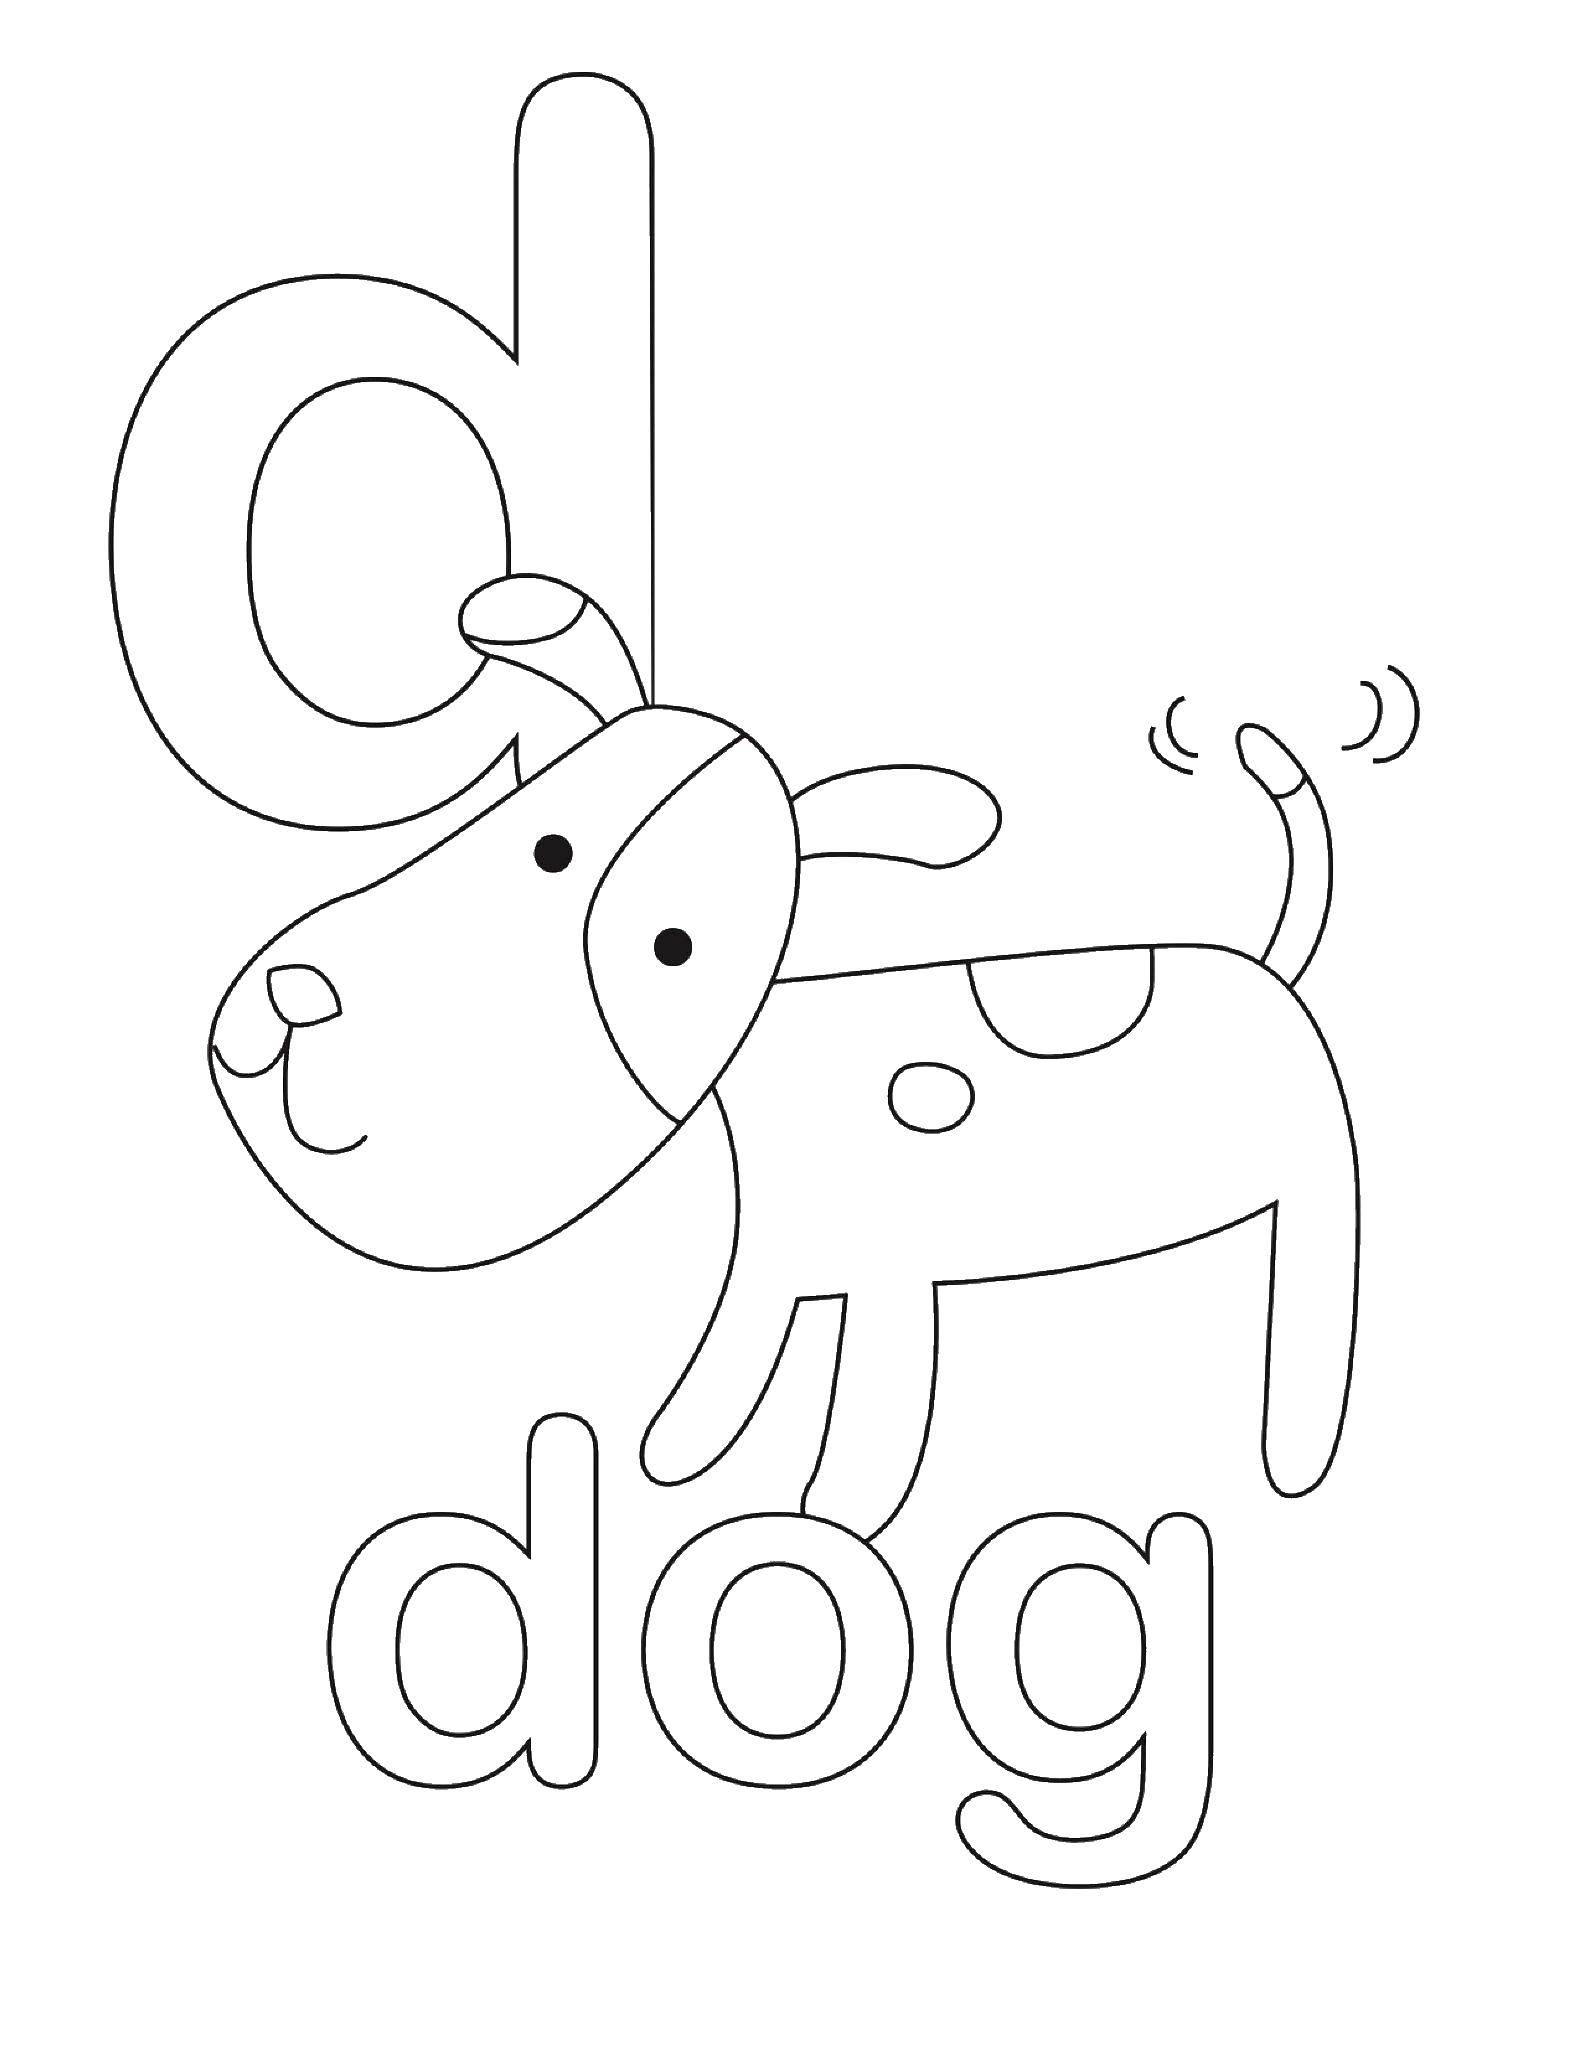 Coloring Dog. Category English words. Tags:  English words, dog.